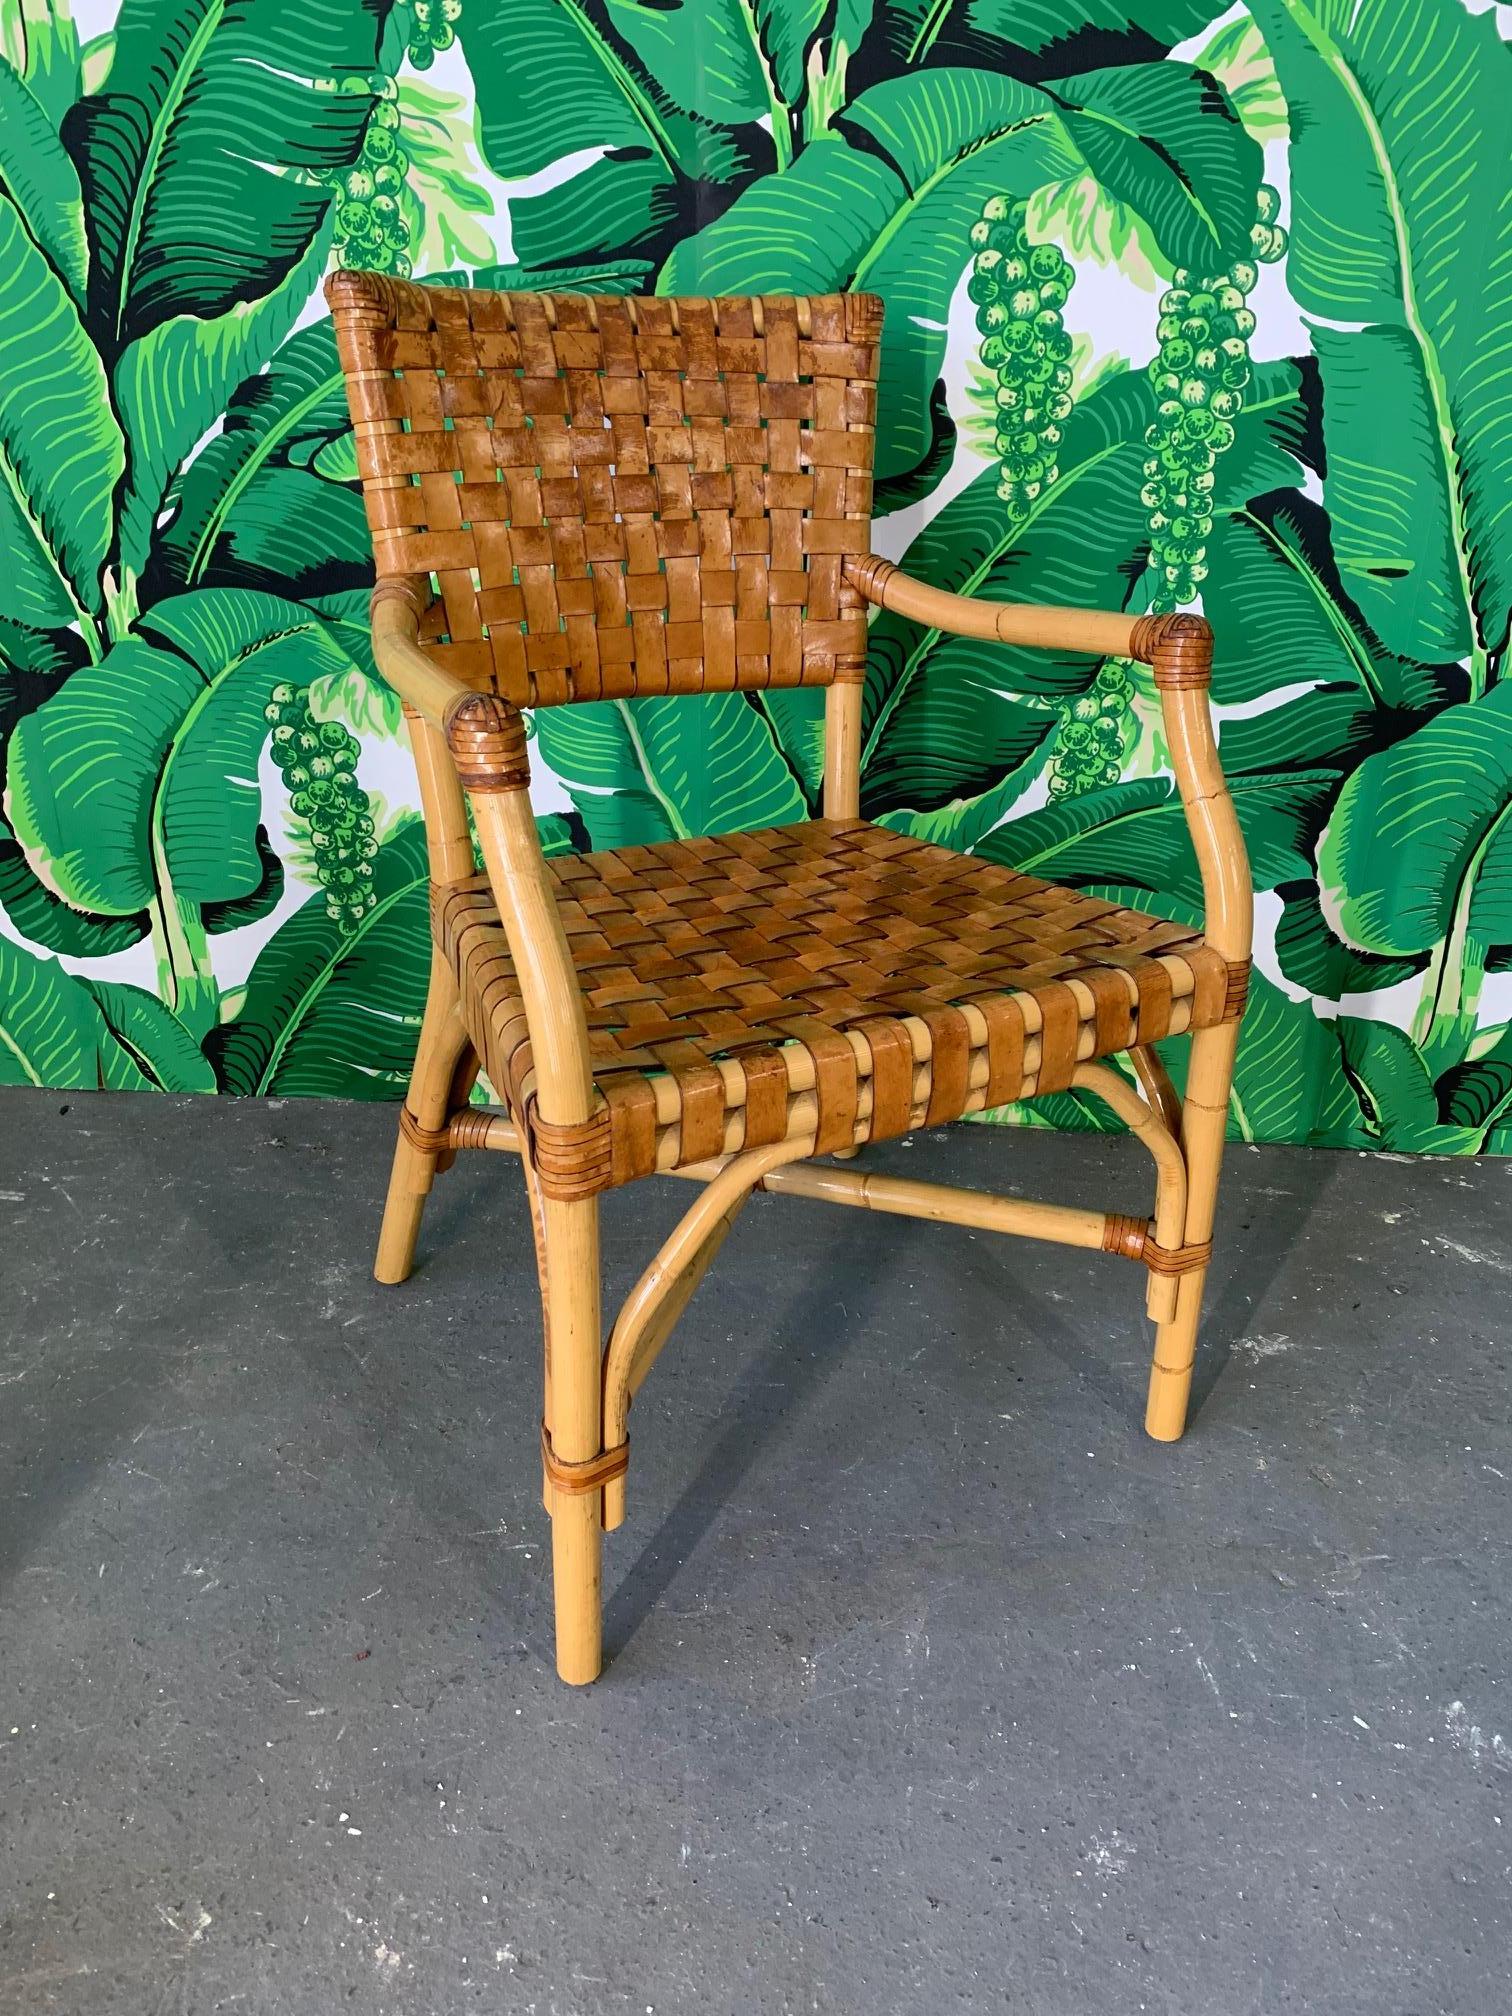 Set of 4 bamboo dining chairs by McGuire feature woven leather seats and backs. Very good vintage condition with minor imperfections consistent with age. Matching table available, see our other listings. Arm height is 26.5